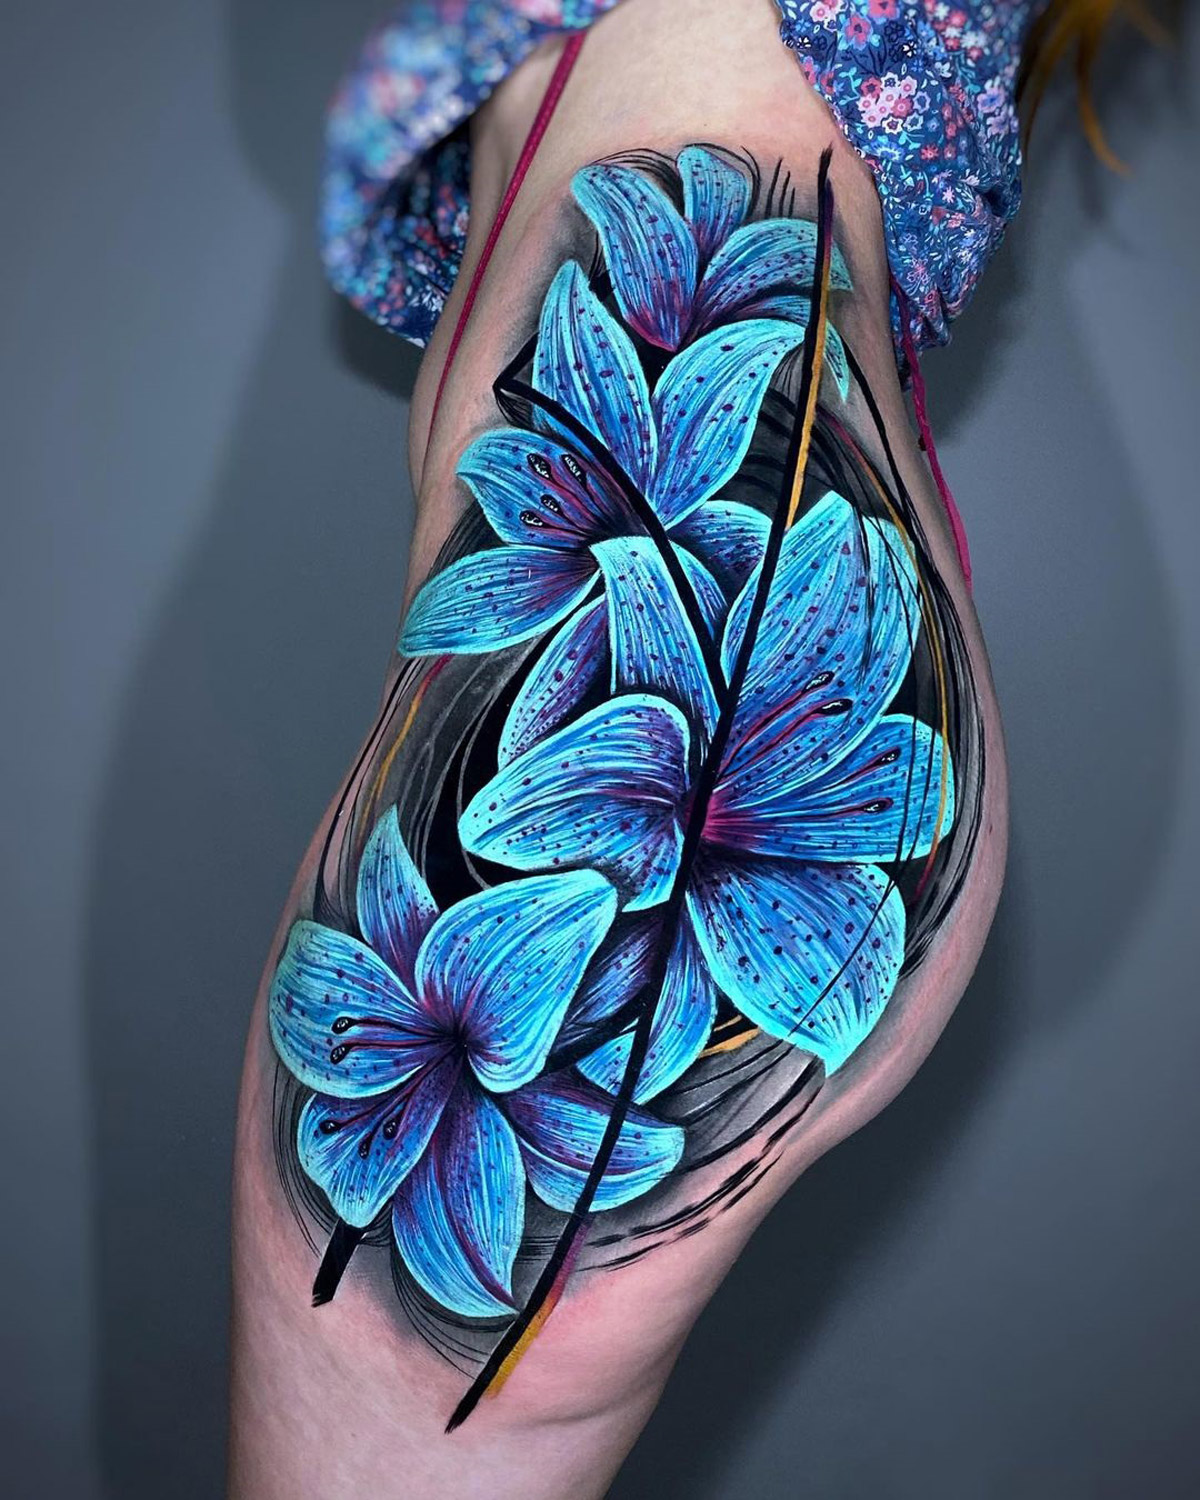 10 Hip Tattoo Ideas and Designs That You Gonna Love